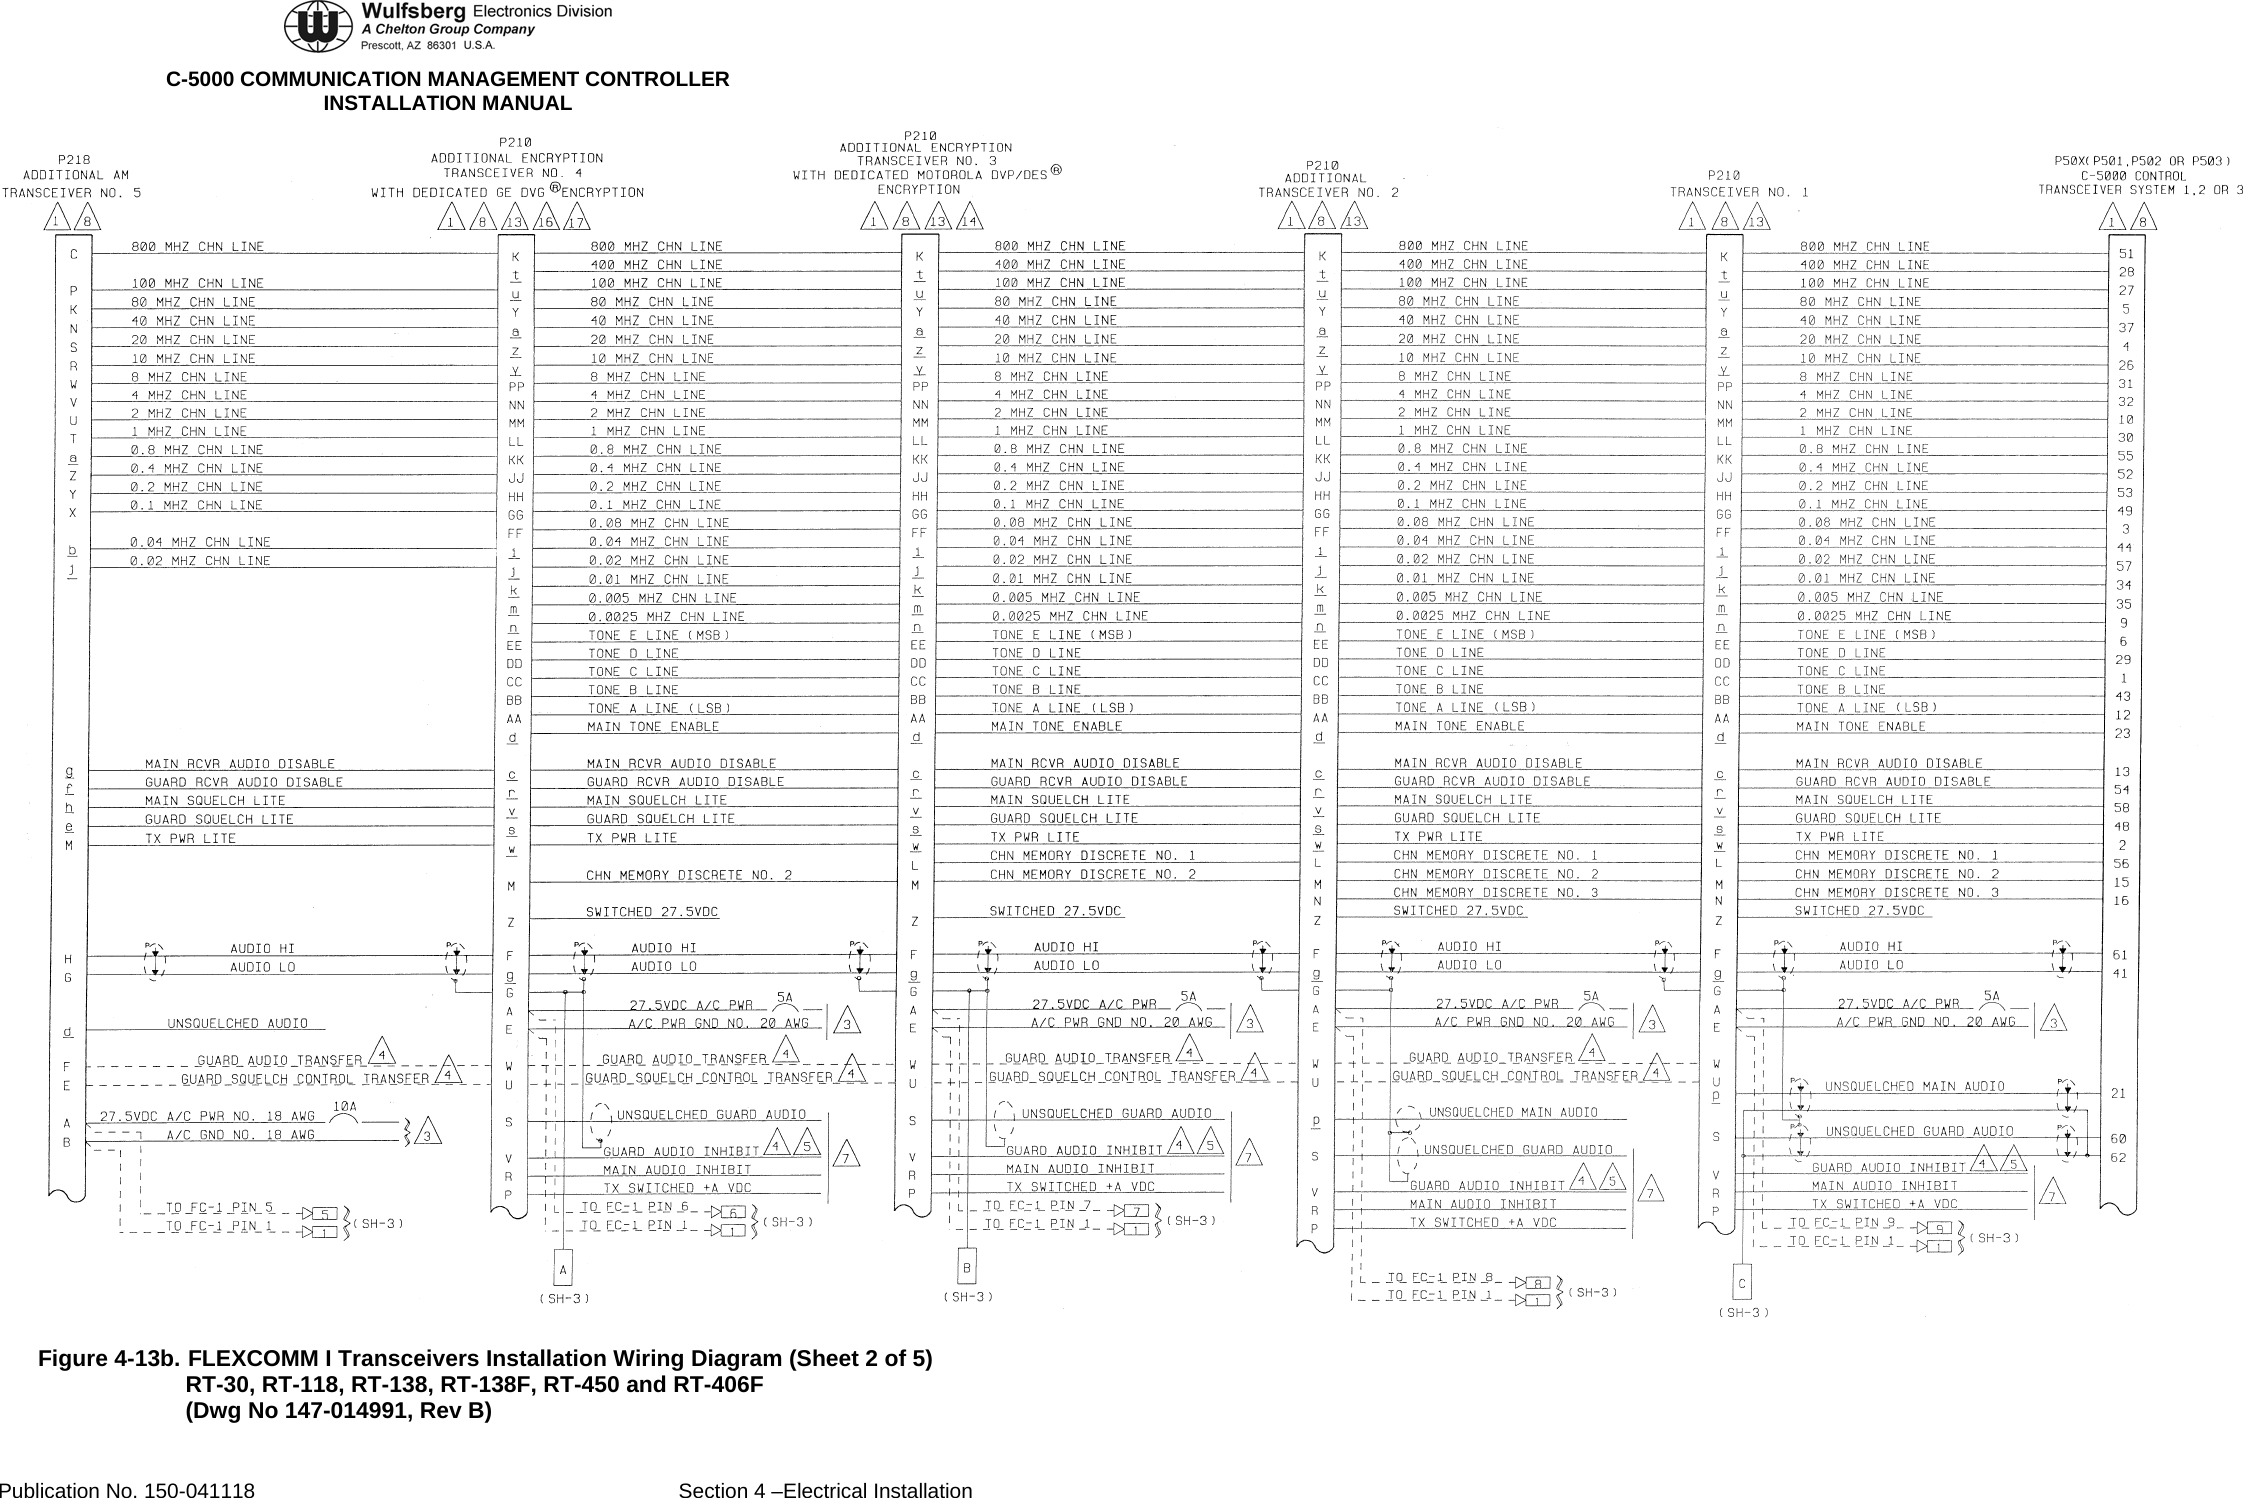  C-5000 COMMUNICATION MANAGEMENT CONTROLLER INSTALLATION MANUAL  Figure 4-13b. FLEXCOMM I Transceivers Installation Wiring Diagram (Sheet 2 of 5) RT-30, RT-118, RT-138, RT-138F, RT-450 and RT-406F (Dwg No 147-014991, Rev B) Publication No. 150-041118  Section 4 –Electrical Installation 